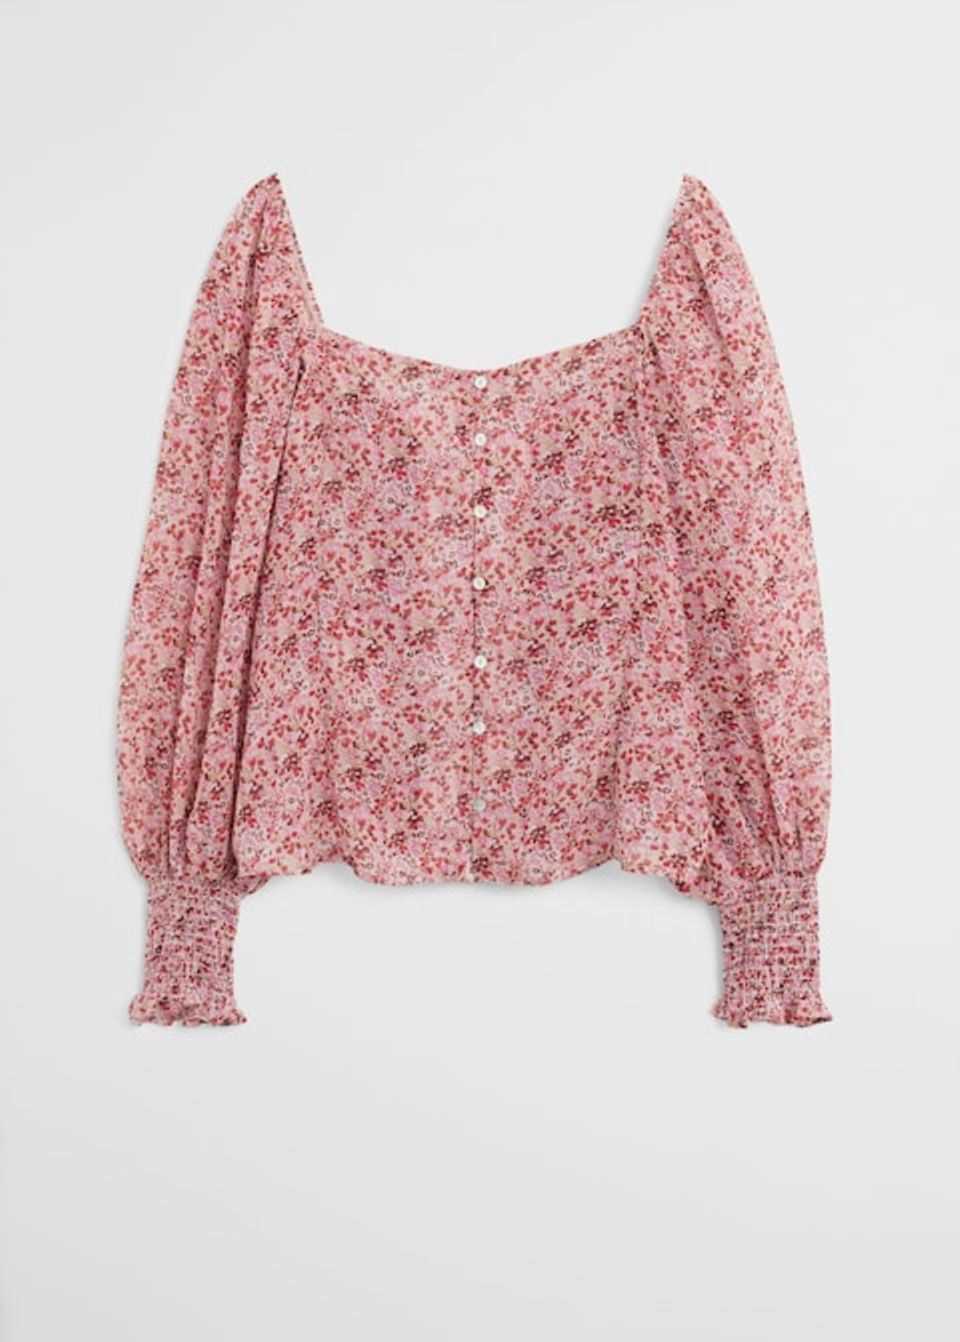 Diligent blouse with mille fleurs print, button placket and off-the-shoulder neckline.  From Violeta by Mango, around 50 euros. 